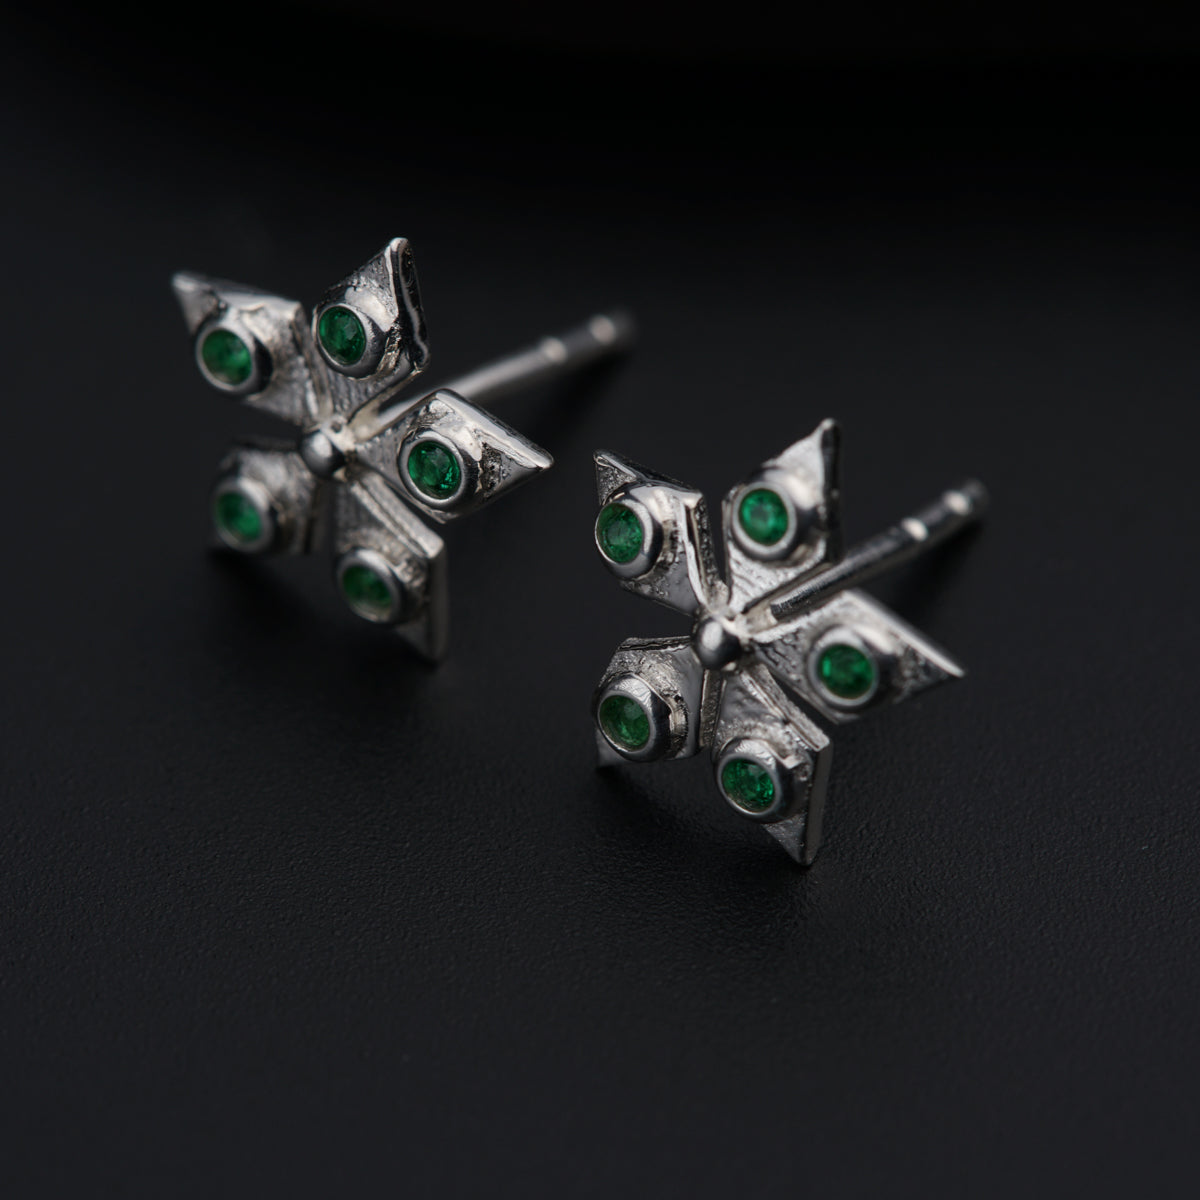 a pair of silver earrings with green stones